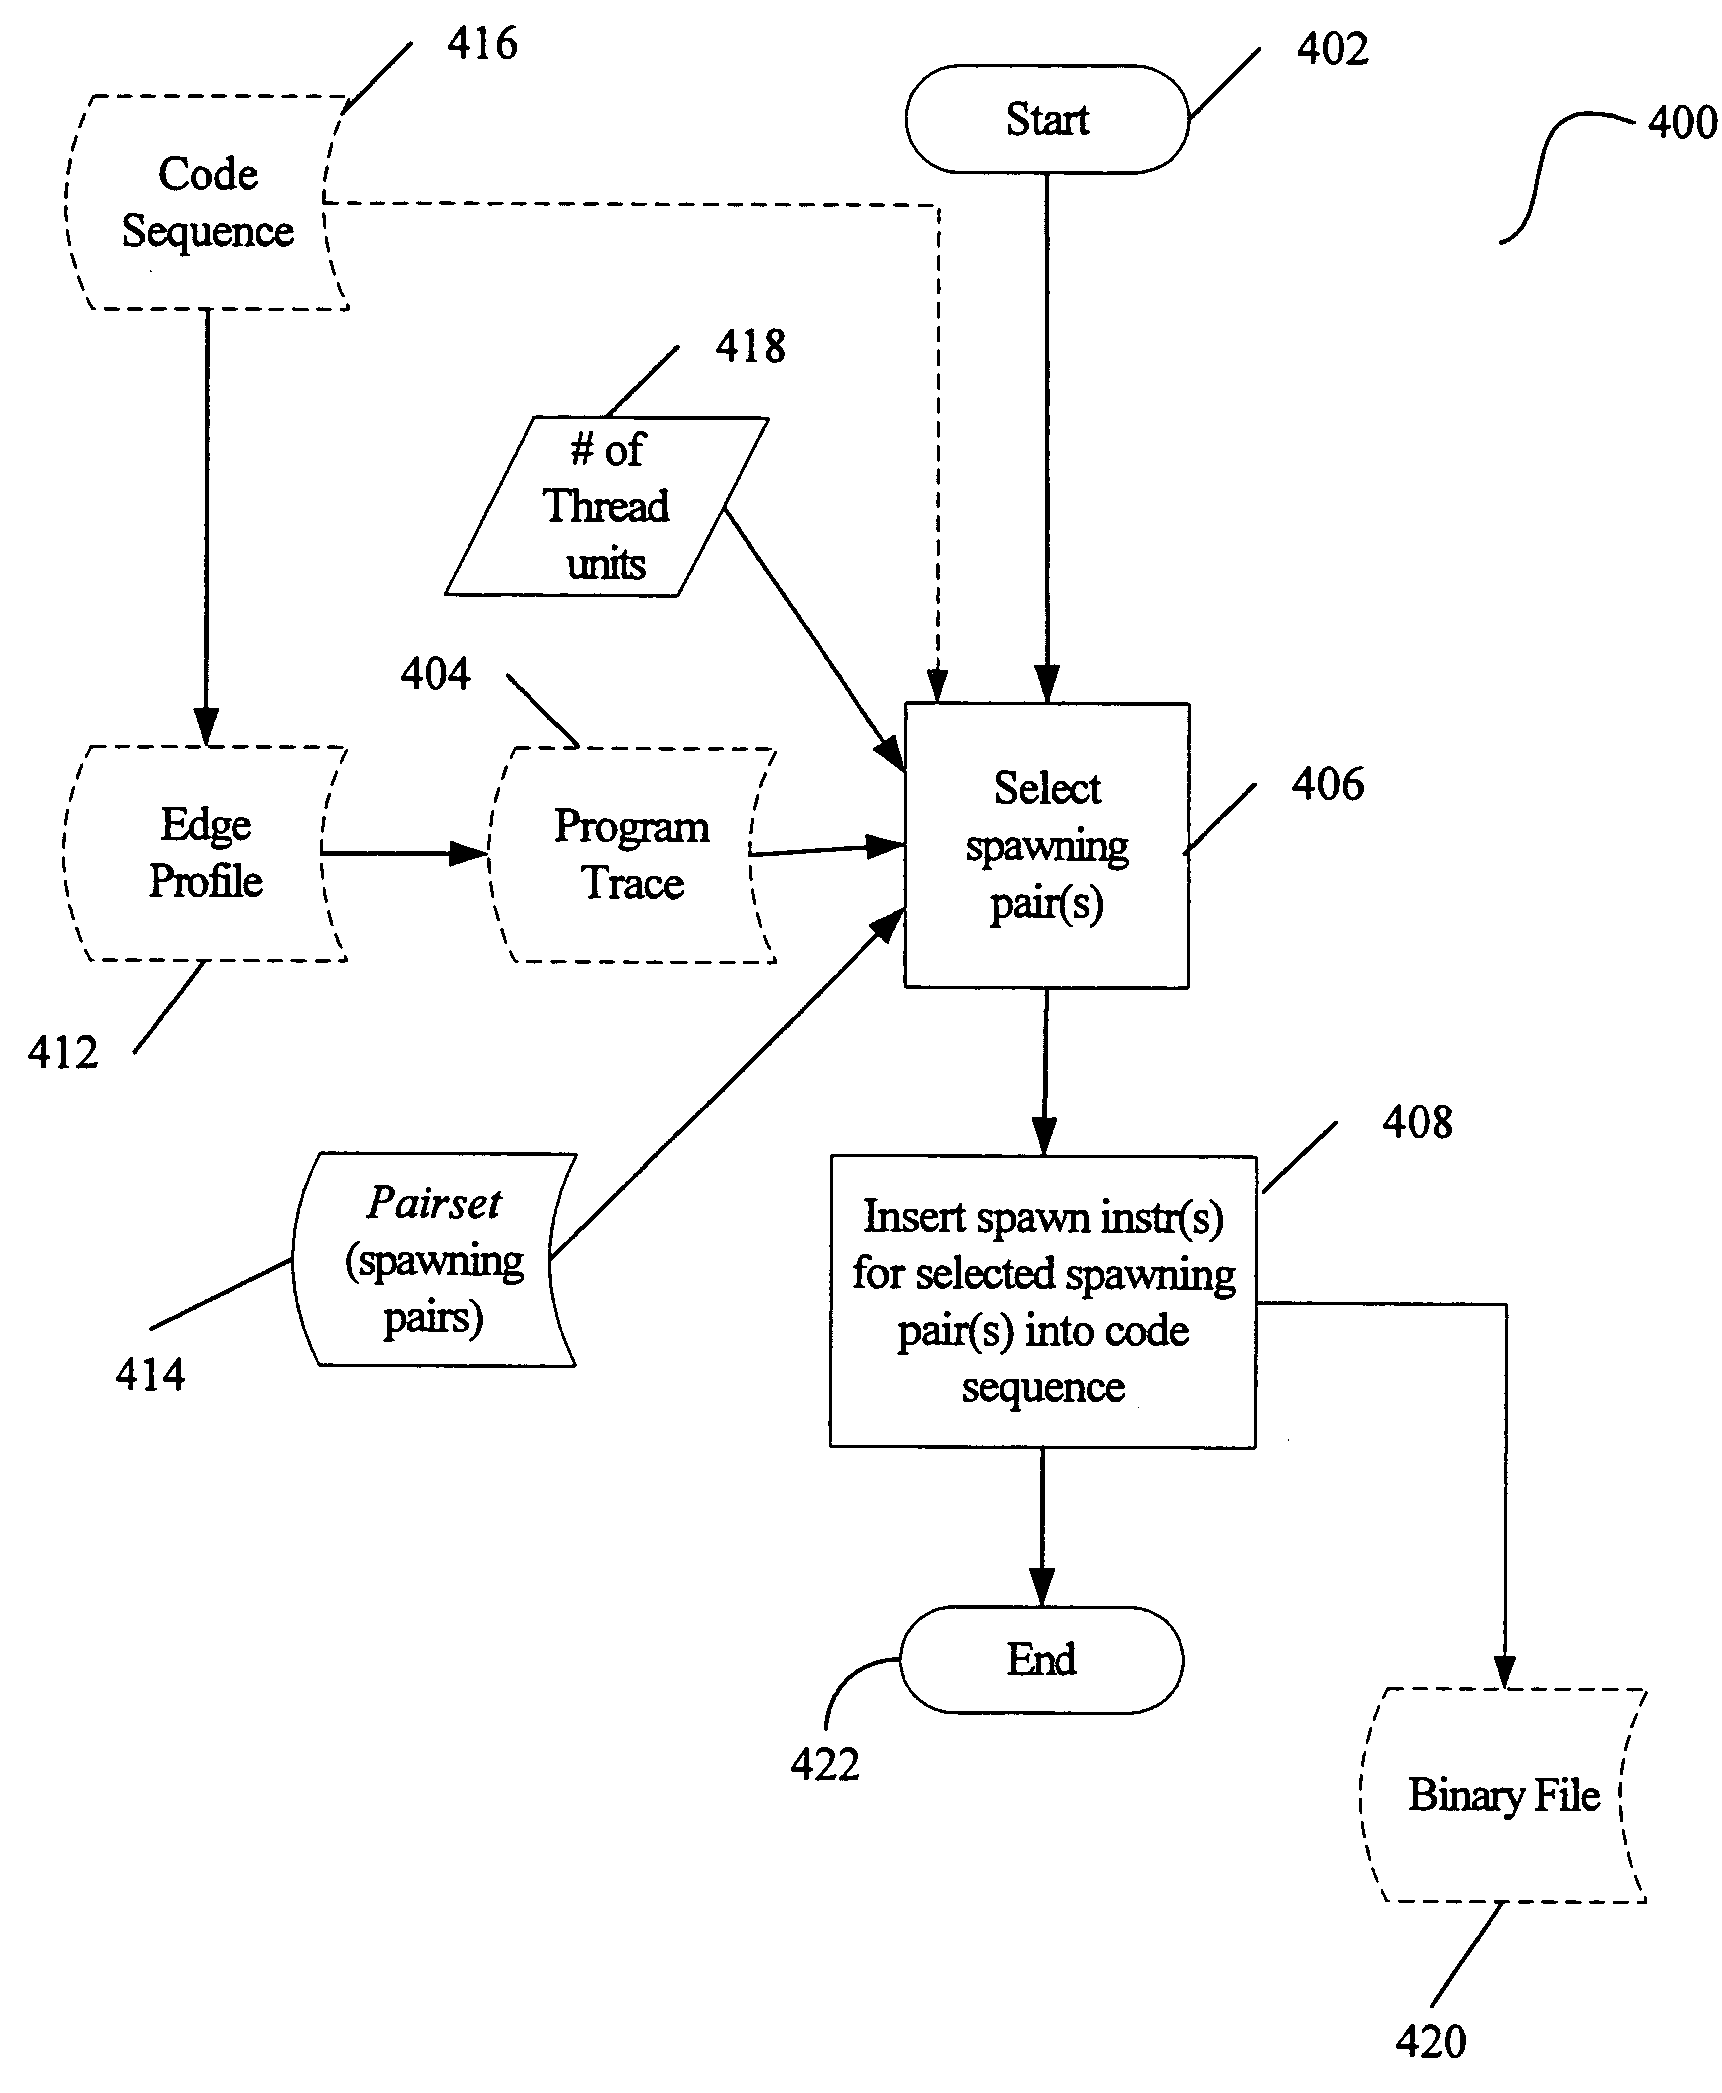 Selection of spawning pairs for a speculative multithreaded processor